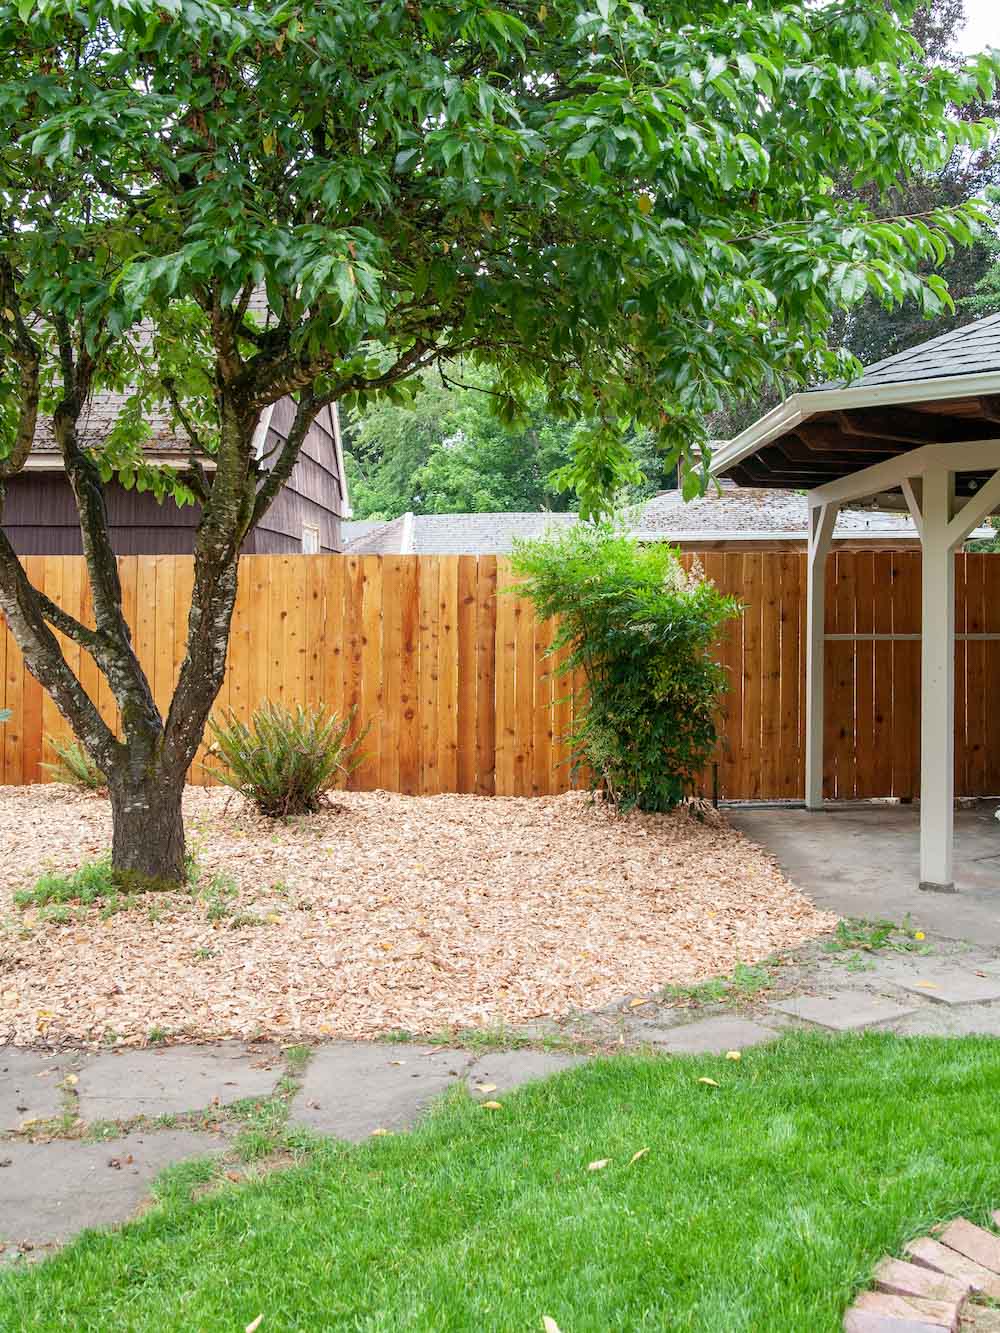 Types of Fences - The Home Depot